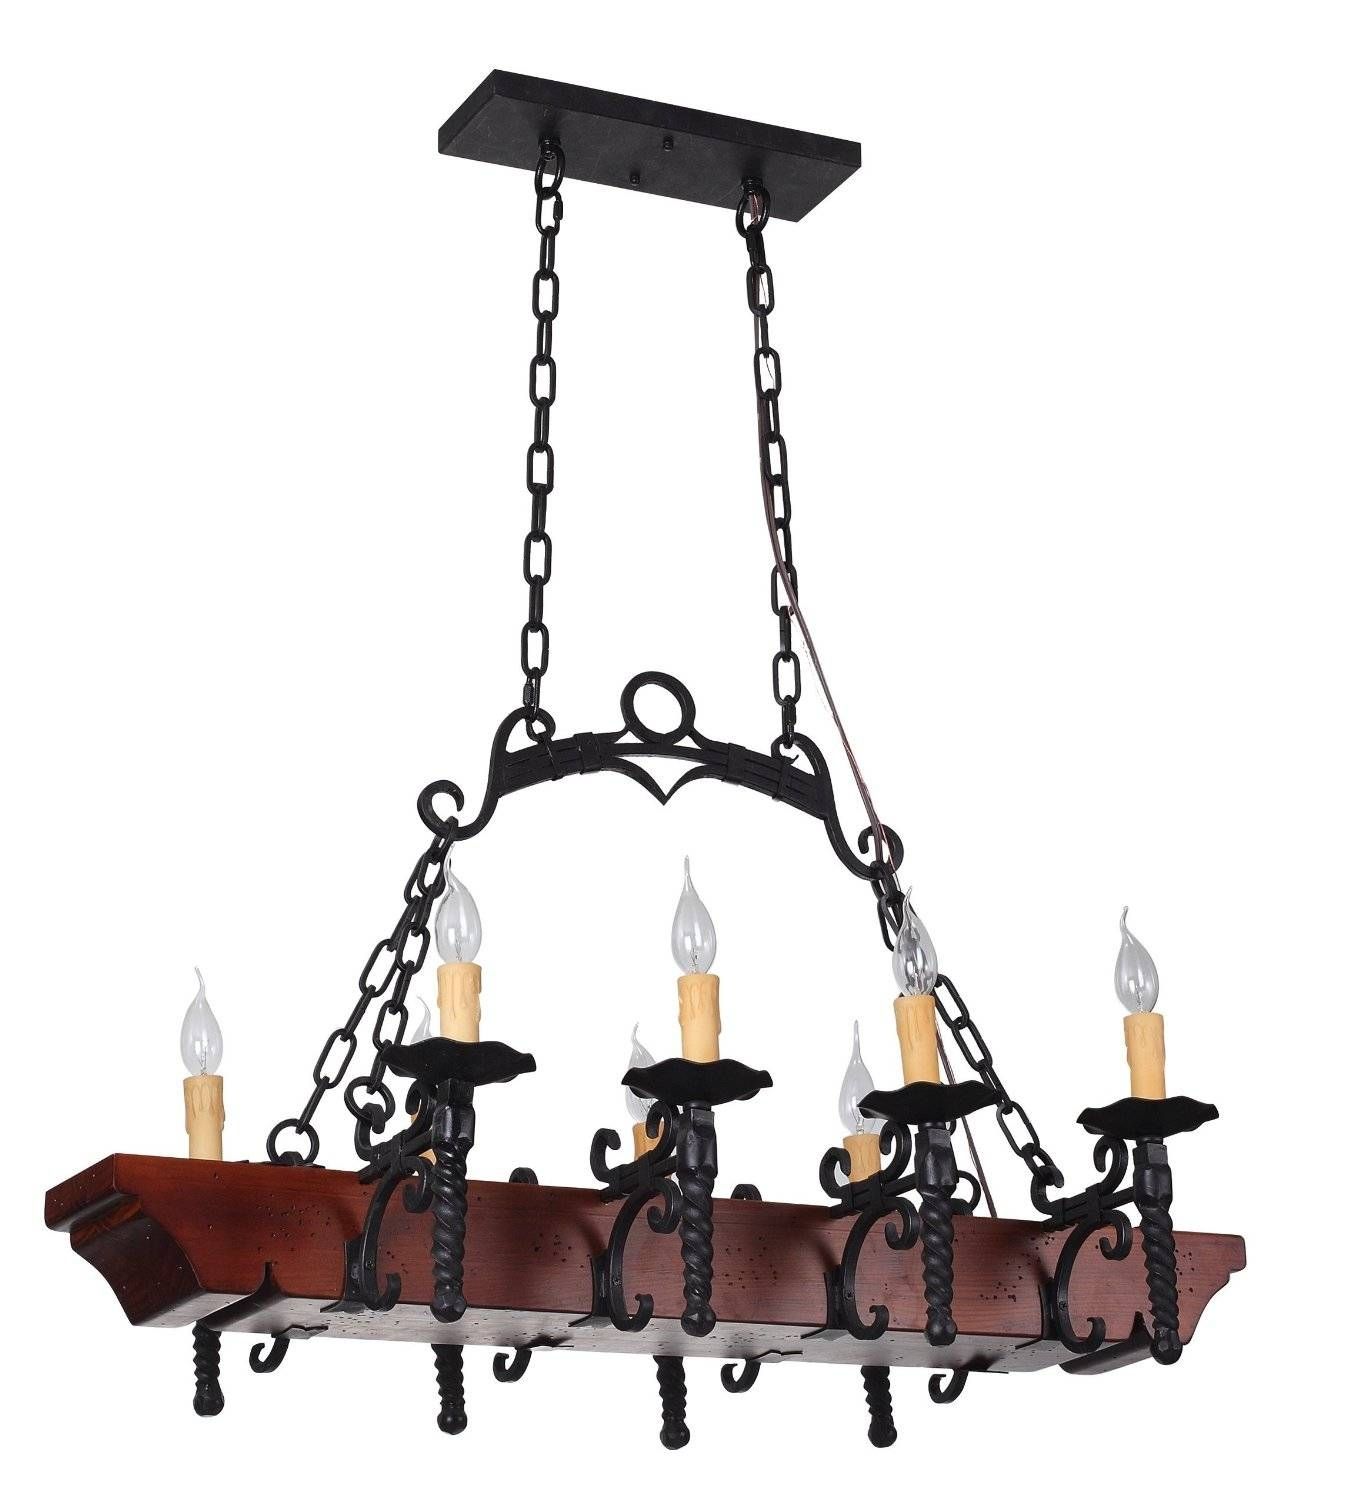 12 Best Rustic Wood And Metal Chandeliers | Qosy With Regard To Wrought Iron Lights Fixtures For Kitchens (View 8 of 15)